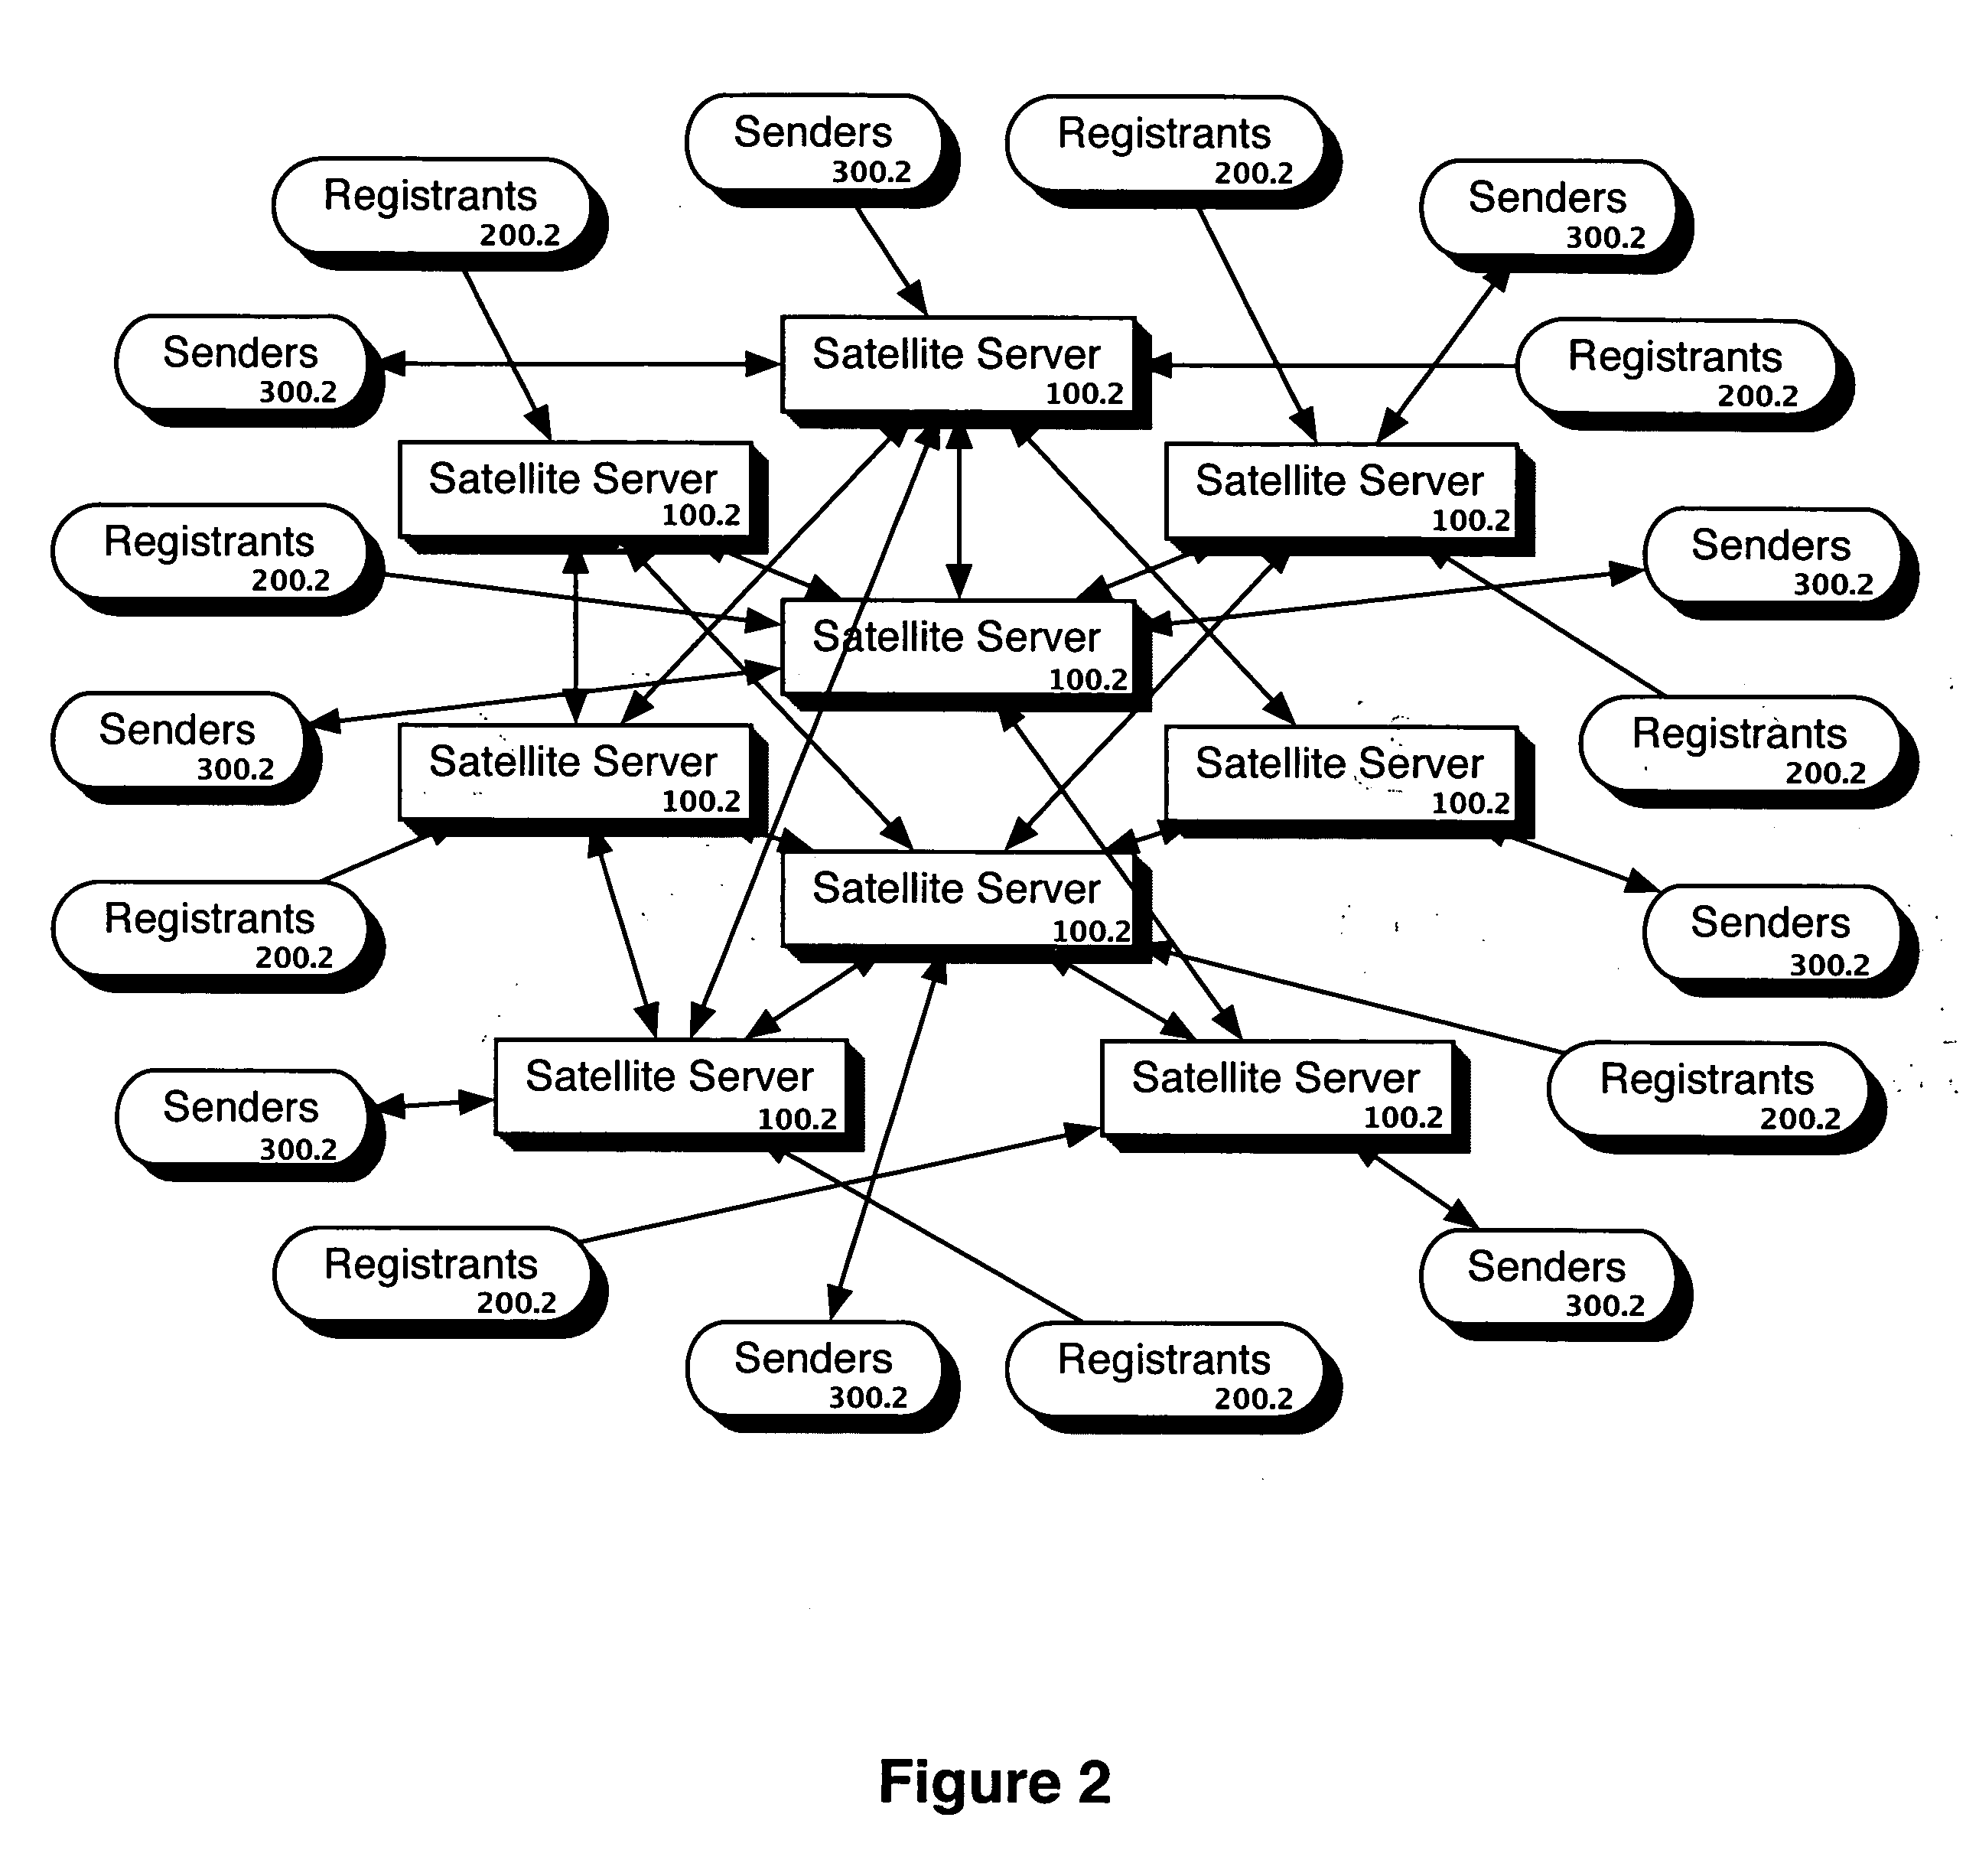 Method and system for a reliable distributed category-specific do-not-contact list